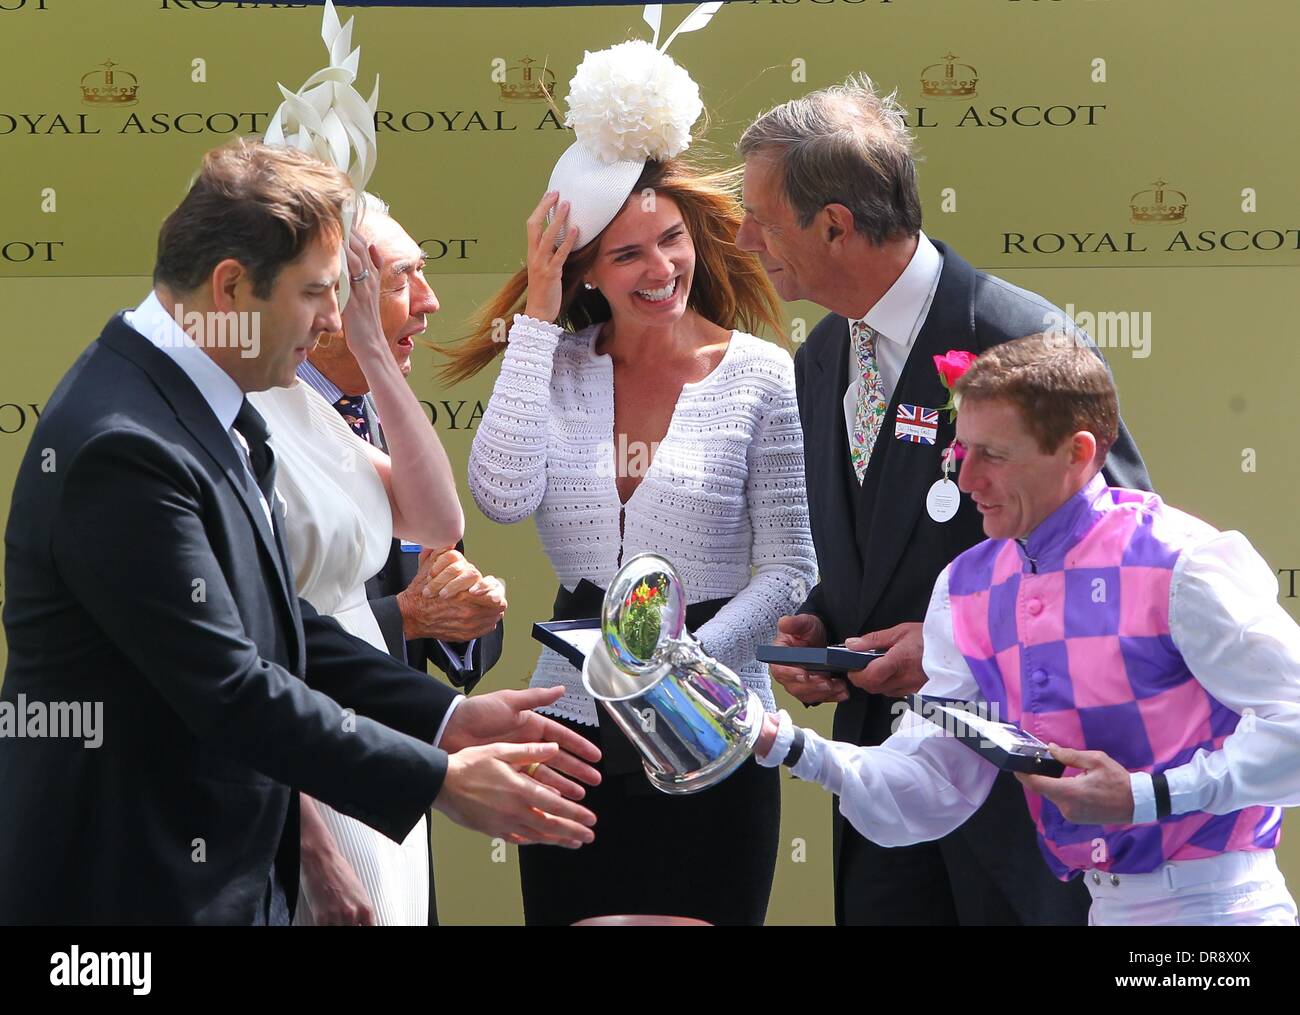 David Walliams and Lara Stone presenting the trophy for the The King Edward VII Stakes to jockey Thomas Chippendale, who knocked it off the podium, much to the amusement of Laura Stone, Henry Cecil Royal Ascot at Ascot Racecourse - Day 4  Berkshire, England - 22.06.12 Stock Photo